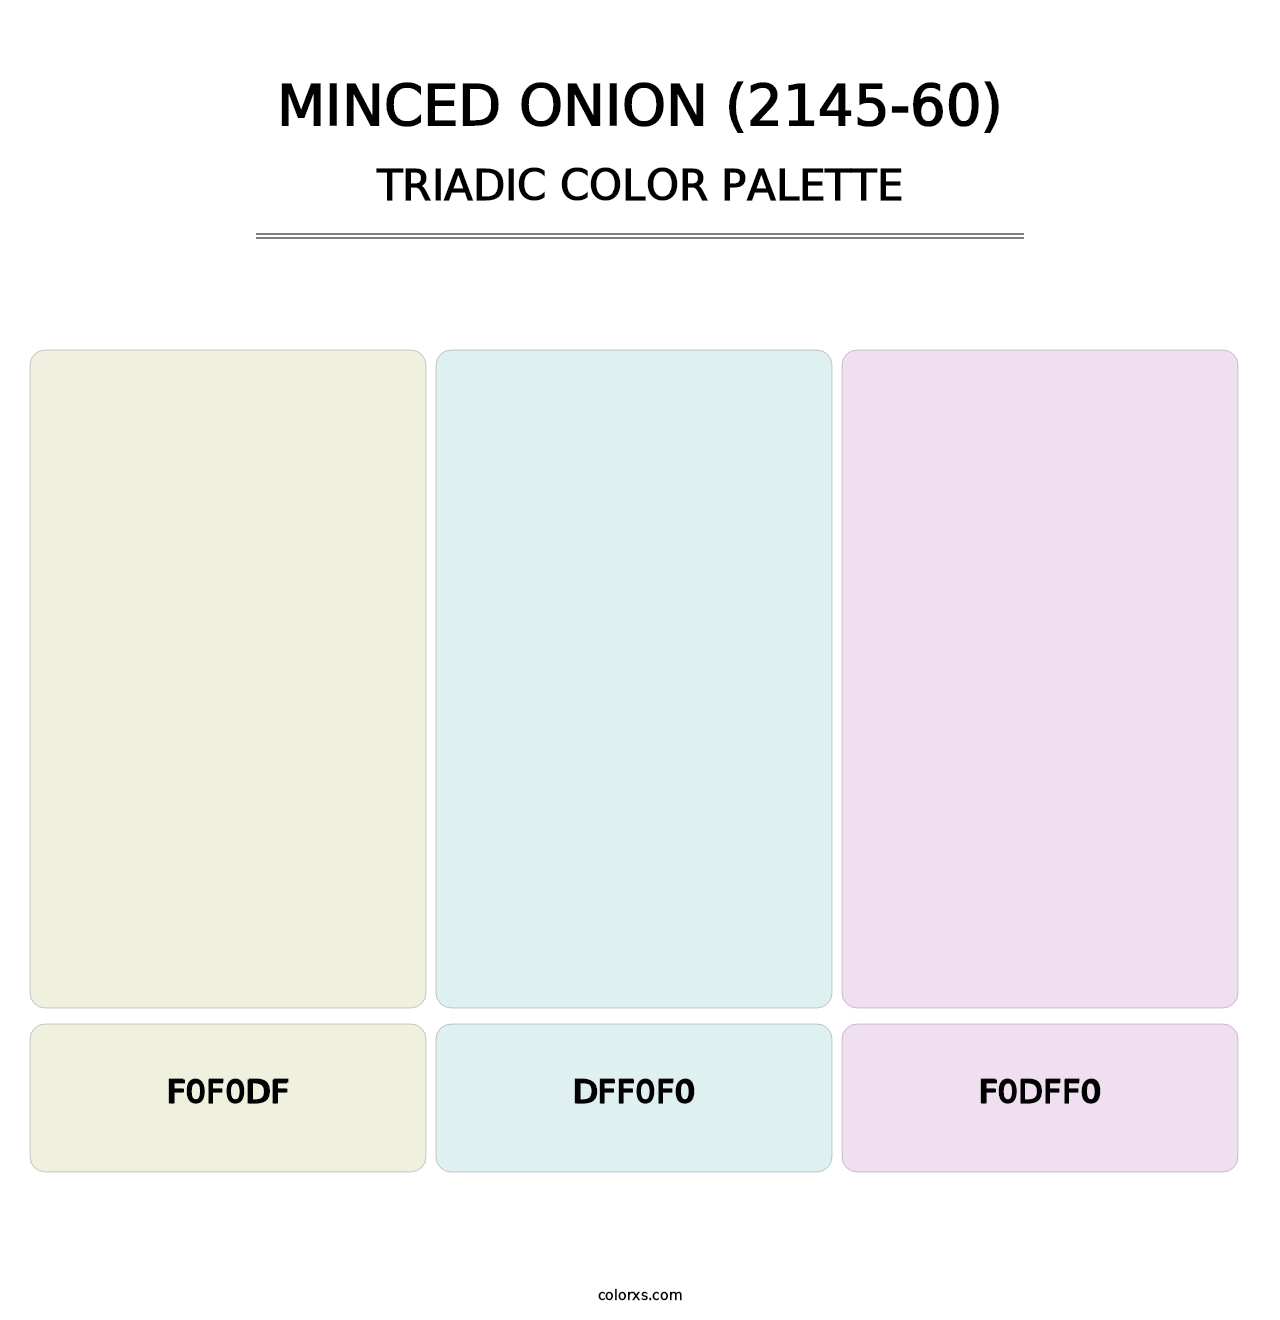 Minced Onion (2145-60) - Triadic Color Palette